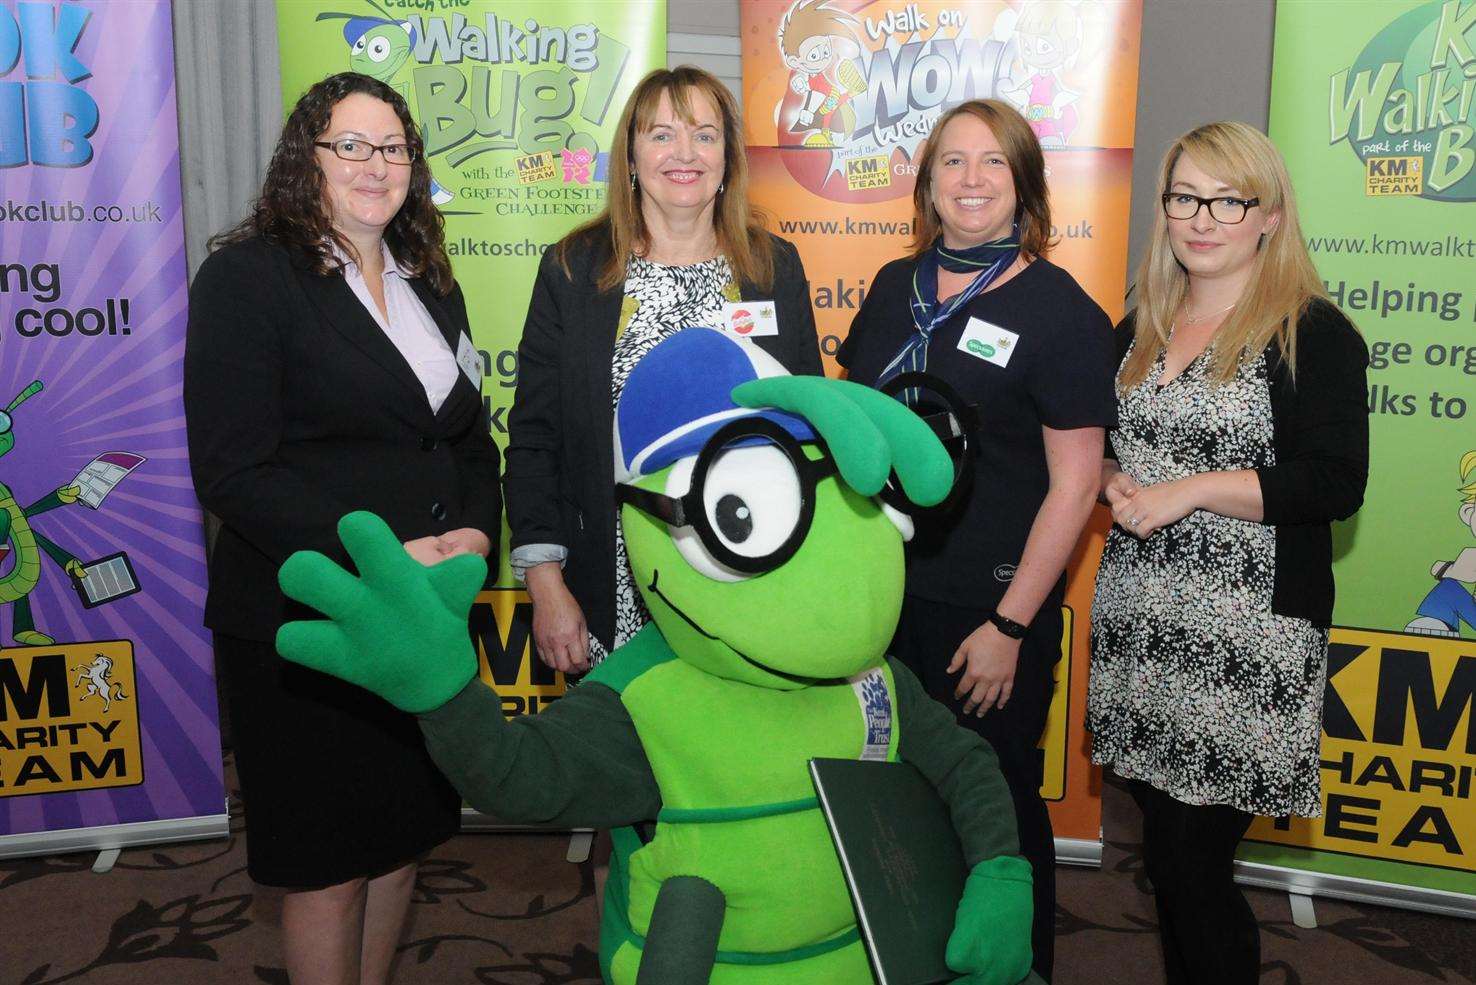 Formal launch of Buster's Book Club at the KM Charity Team's annual forum at Mercure Great Danes Hotel, Maidstone, with sponsors Nicki Curry (Three R's Teacher Recruitment), Elizabeth Carr (Mini Babybel), Ruth Warren (Specsavers) and Sarah Butler (Orbit South)